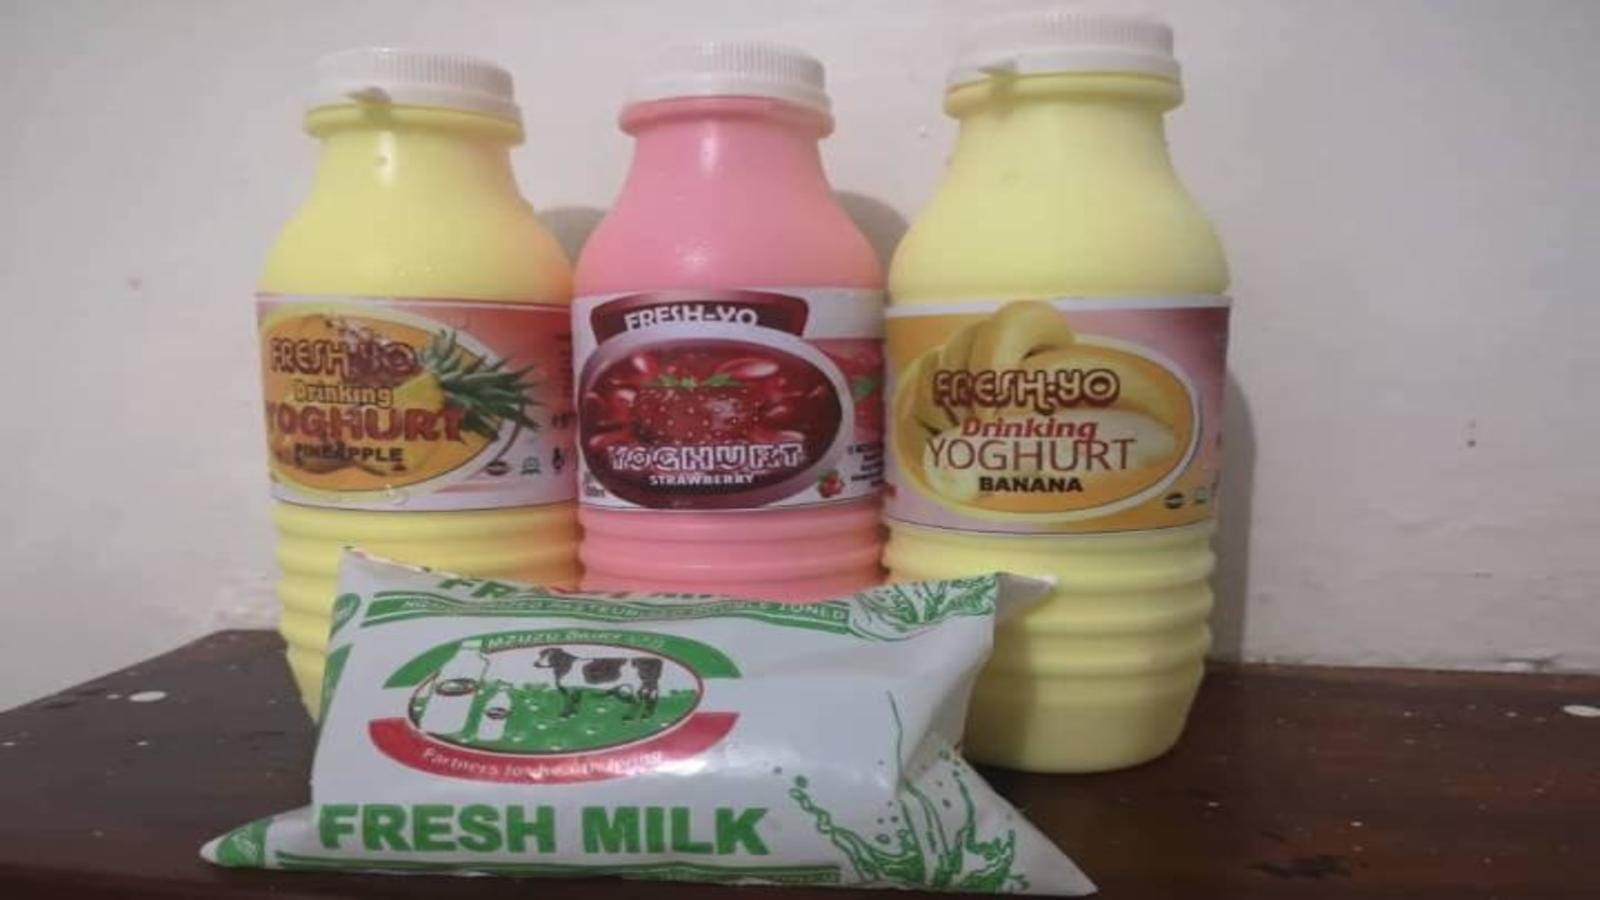 Malawian dairy processing start-up Mzuzu Dairy doubles out-put with new machinery